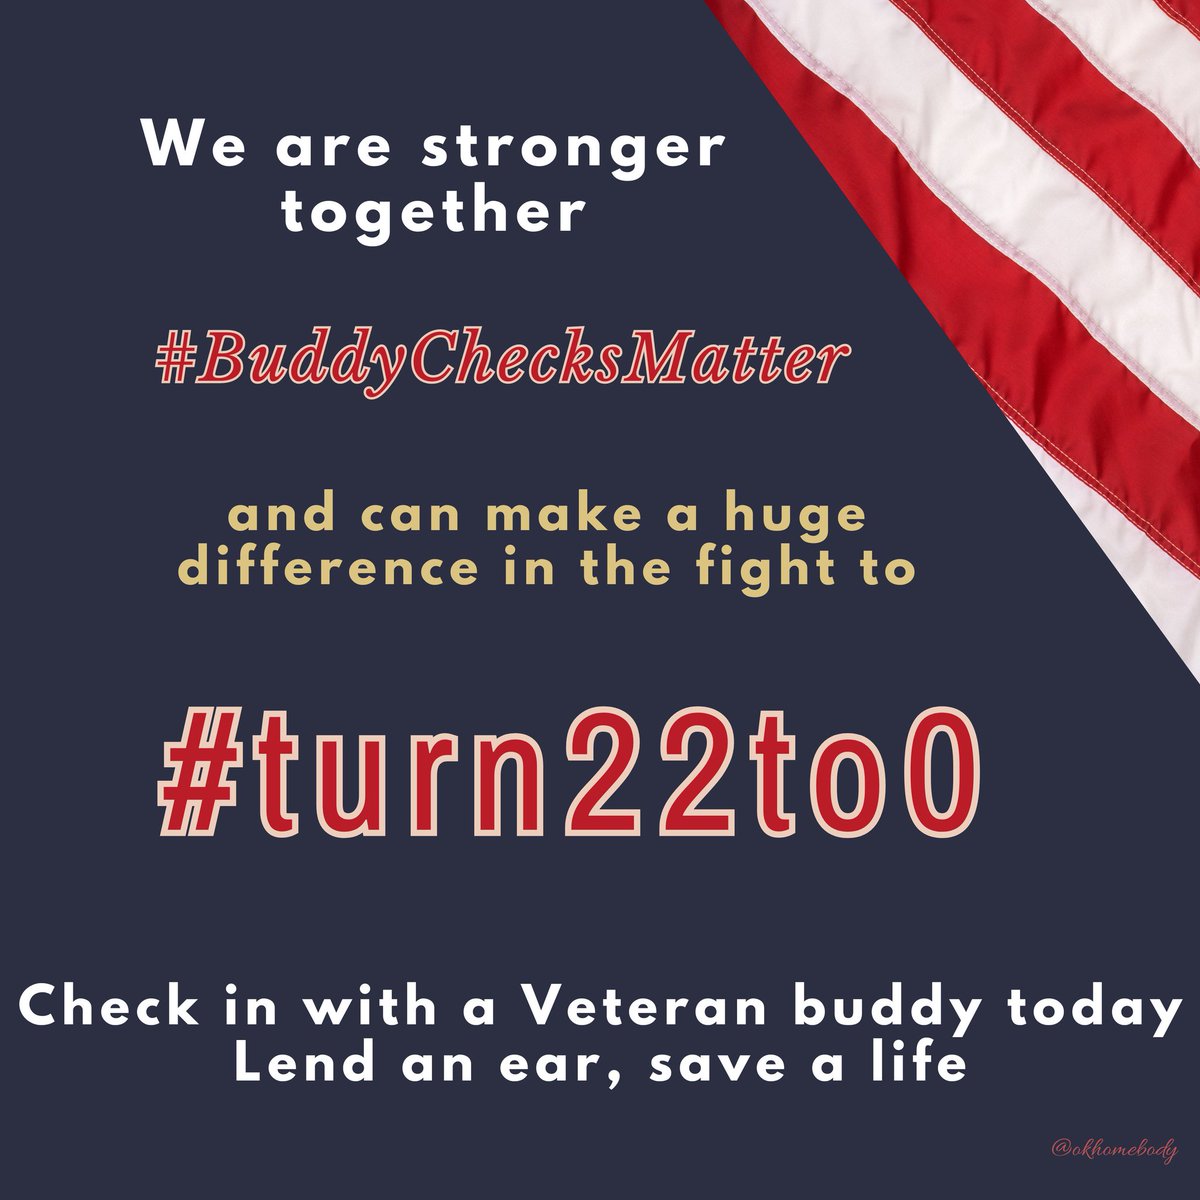 Good morning Patriots!  On #ThoughtfulTuesday we #Veterans should do our #BuddyChecks because #BuddyChecksMatterMoreIn2024 to help #EndVeteranSuicide and #turn22to0 ASAP! Please #PrayForOurTroops #VeteranLivesMatter. God Bless you all and #GodBlessAmerica!!🙏🙏🇺🇸🇺🇸